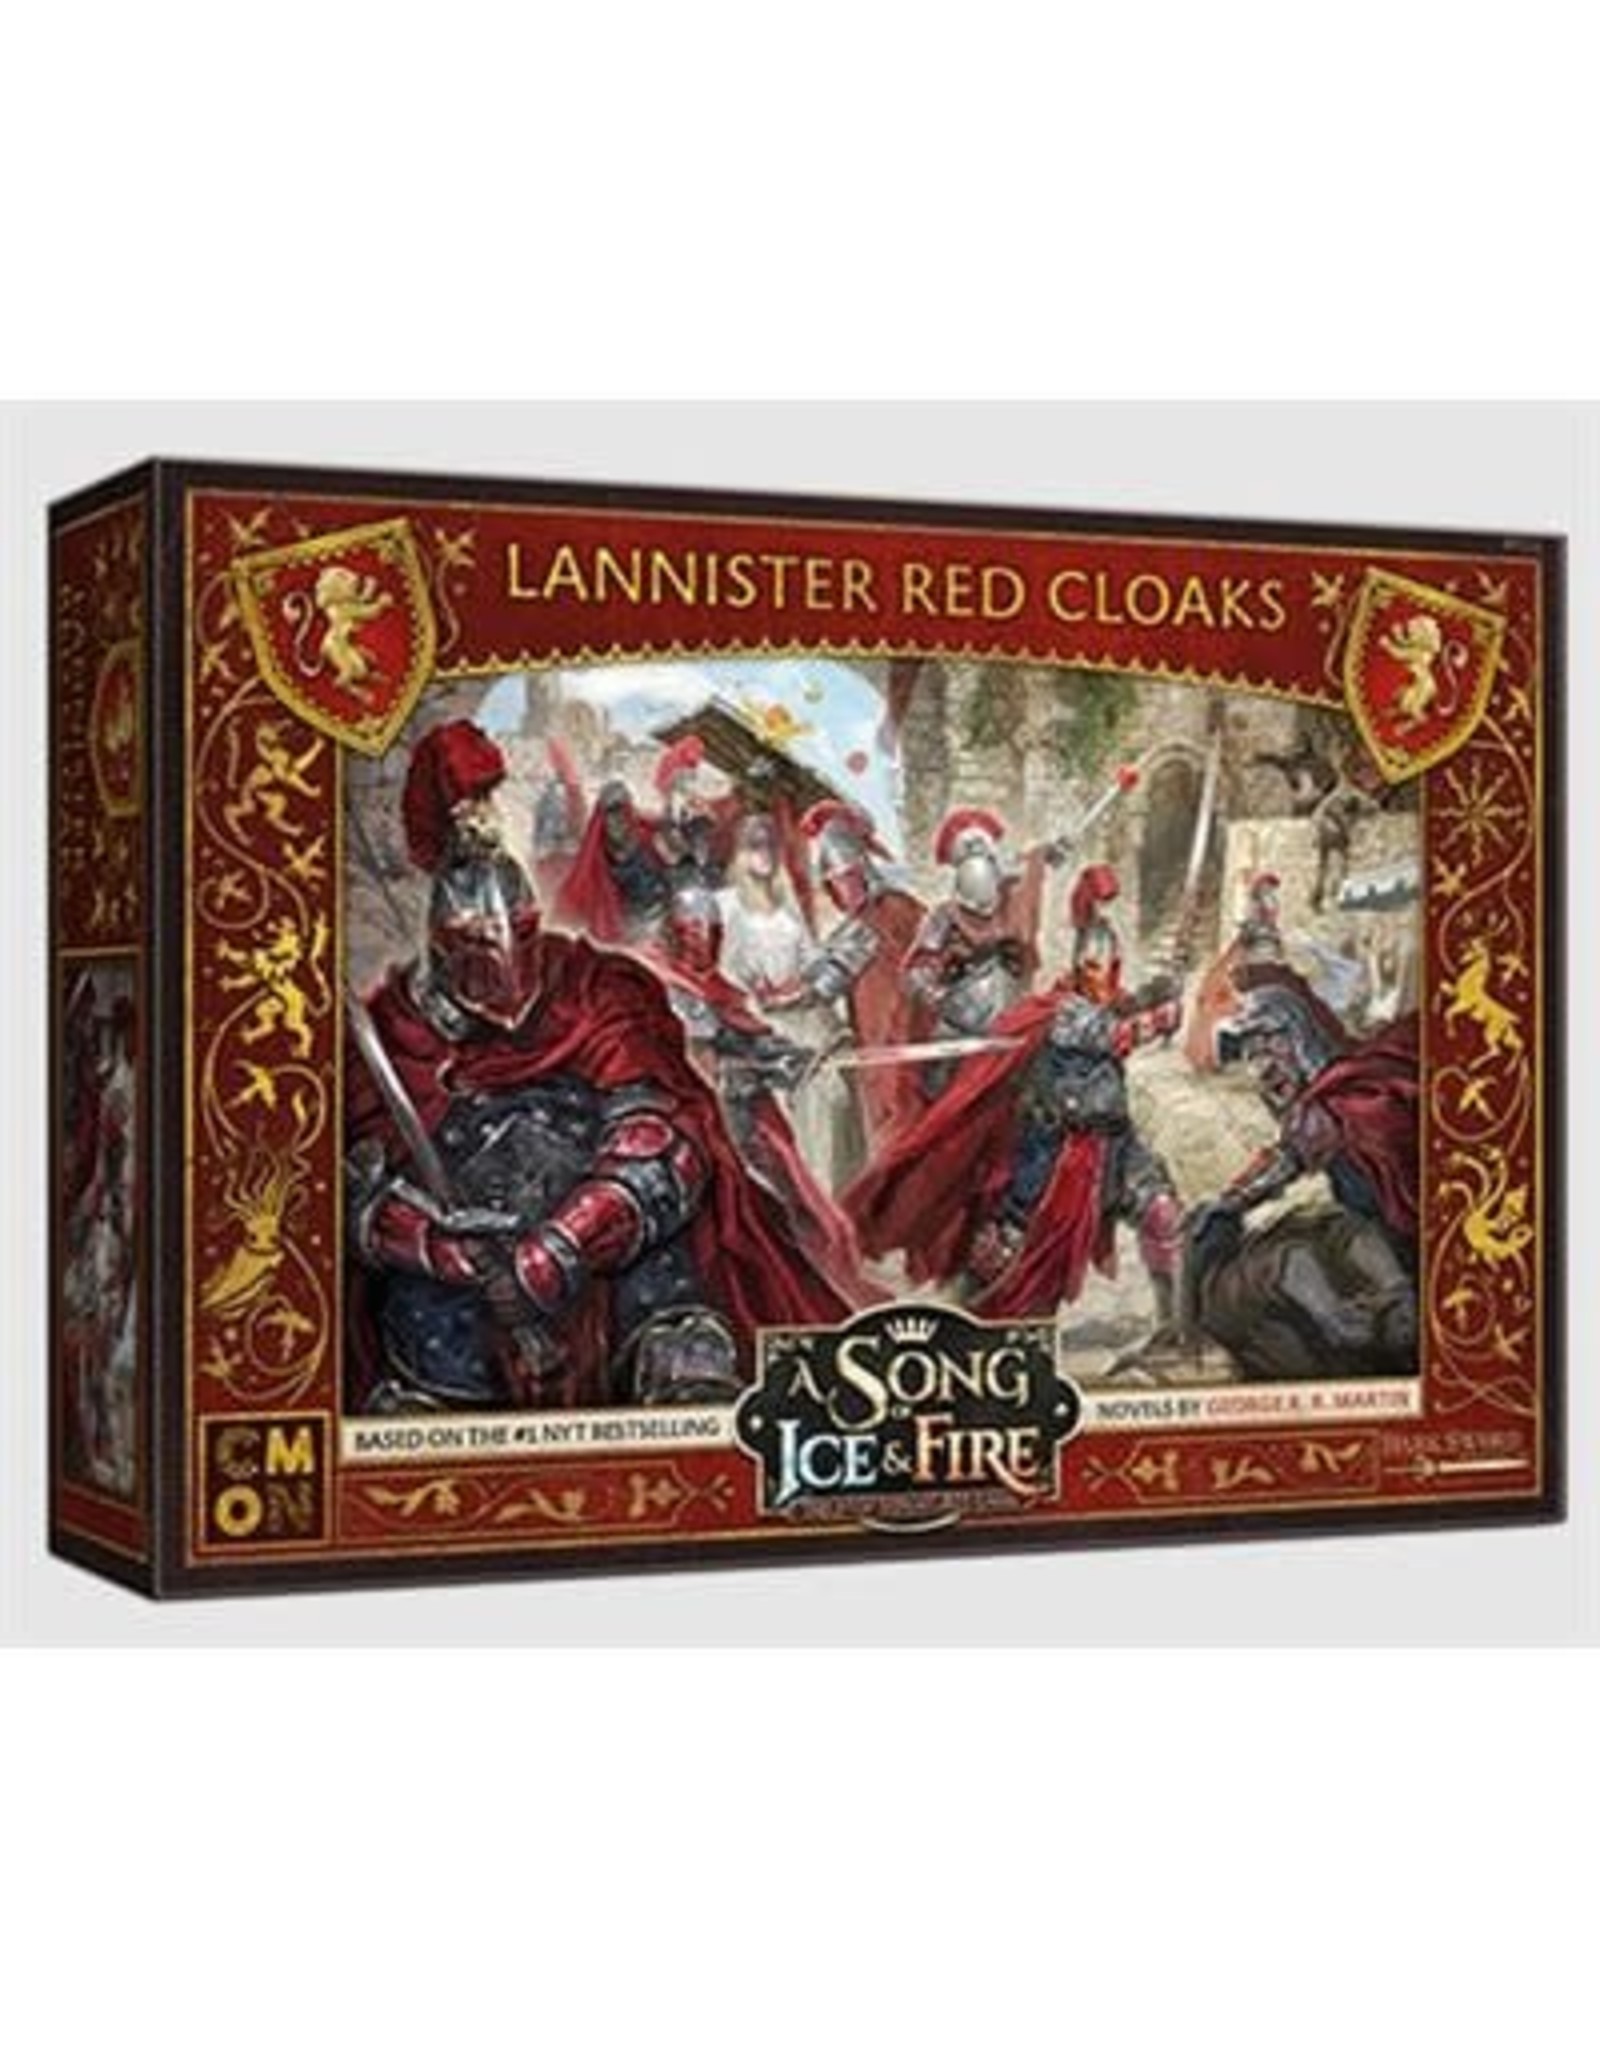 CMON A SONG OF ICE & FIRE: LANNISTER RED CLOAKS